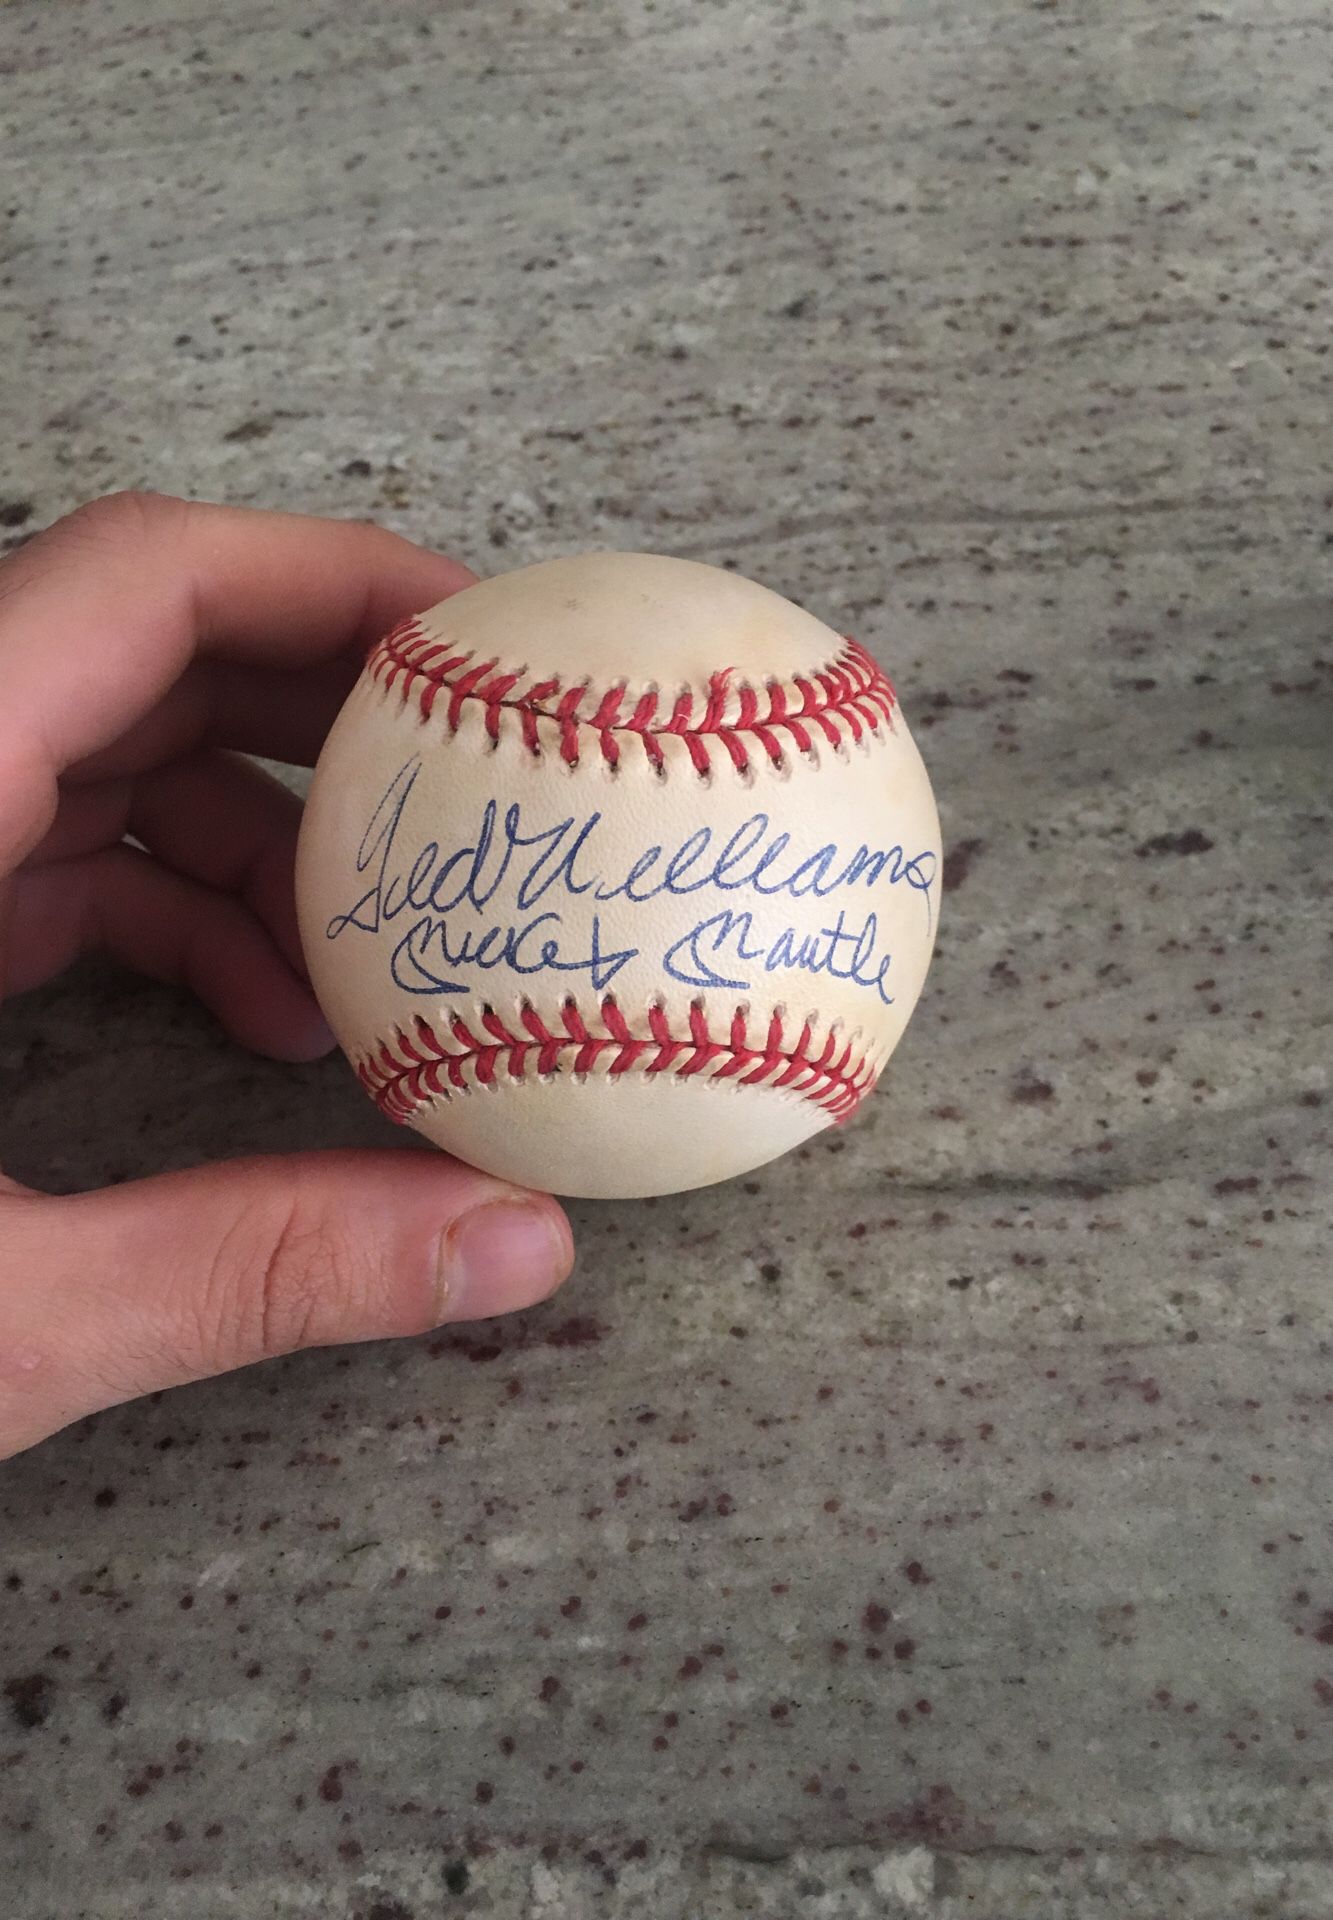 Mickey Mantle / Ted Williams autographed baseball